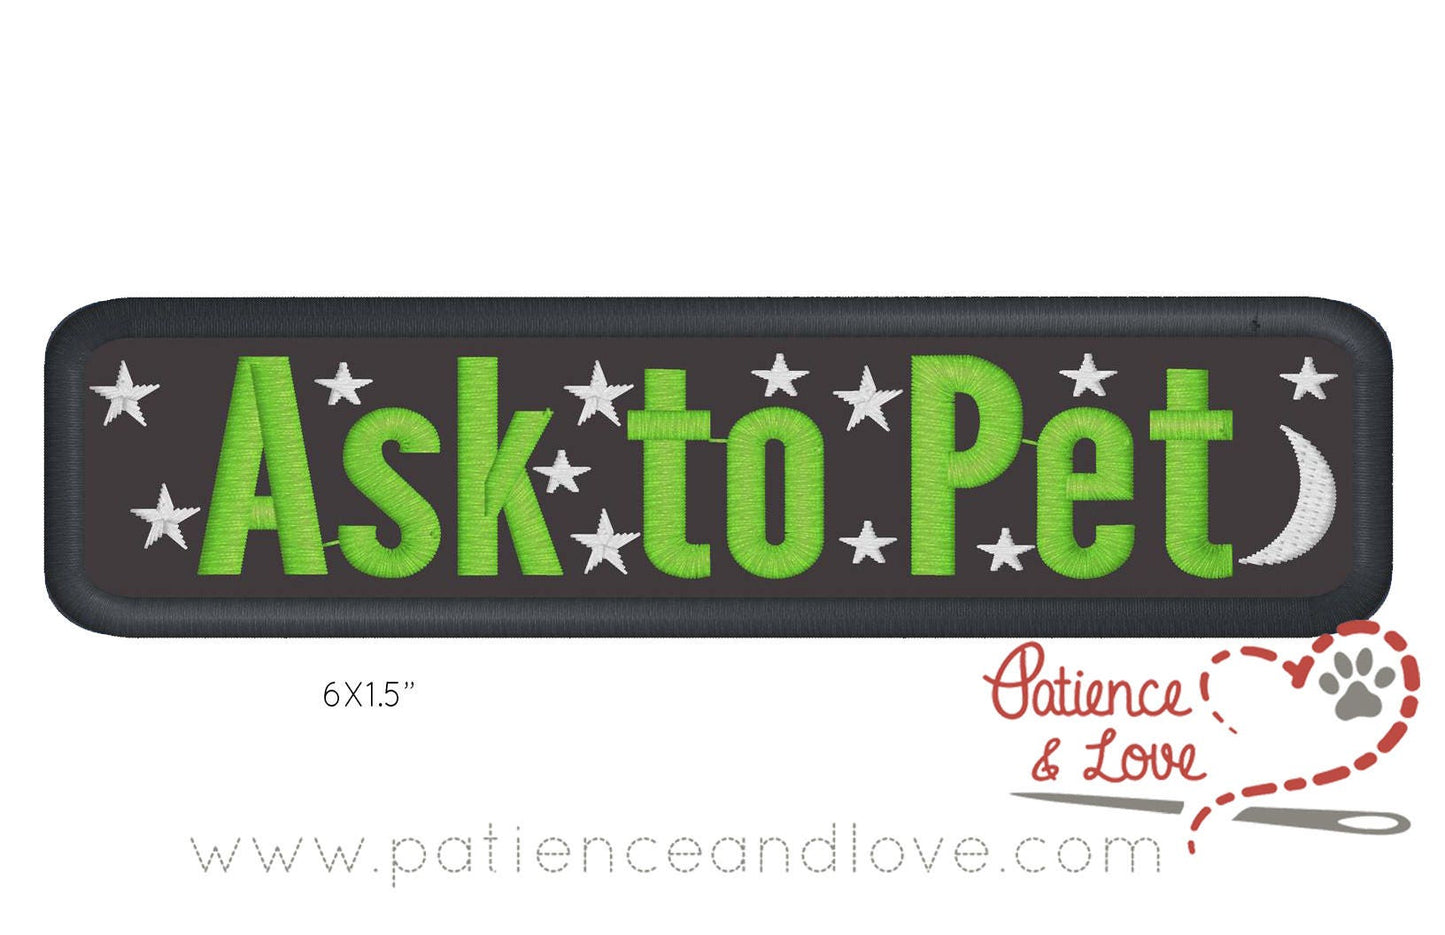 ASK TO PET moon and stars, 6x1.5 inch rectangular patch